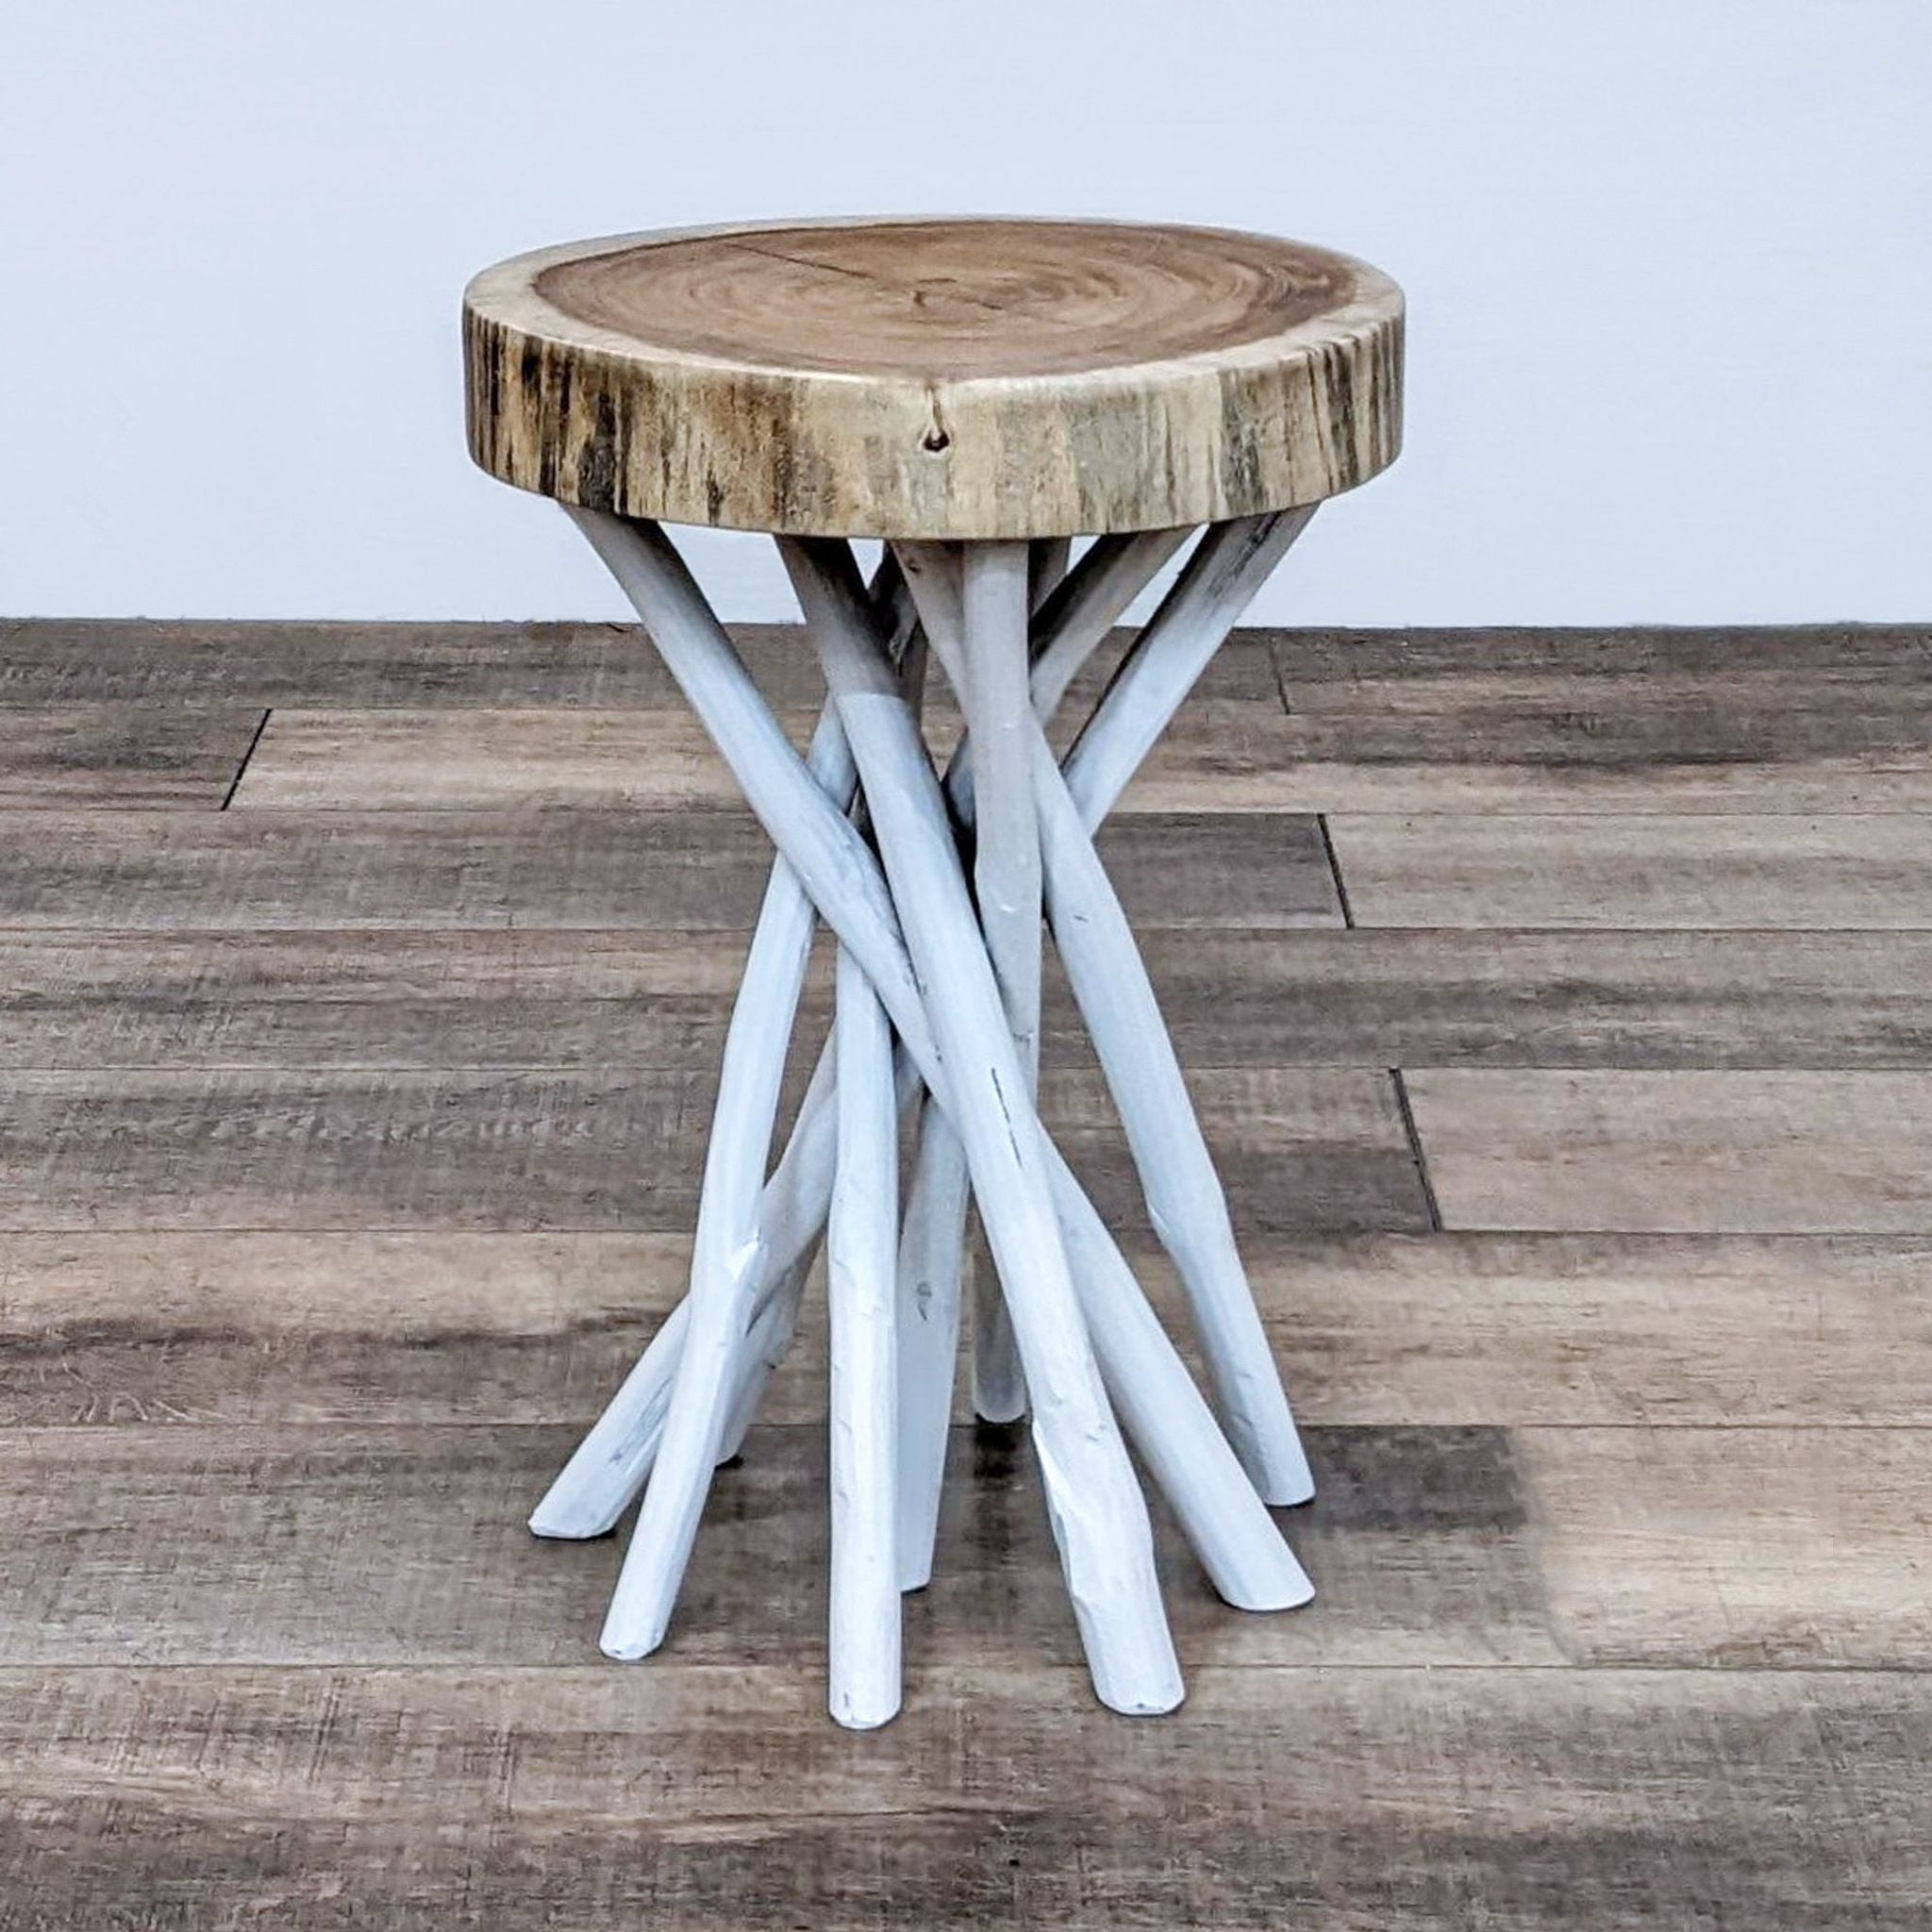 1. Reperch brand side table featuring a natural wooden top with a multi-branch base painted in white, situated on a wooden floor.